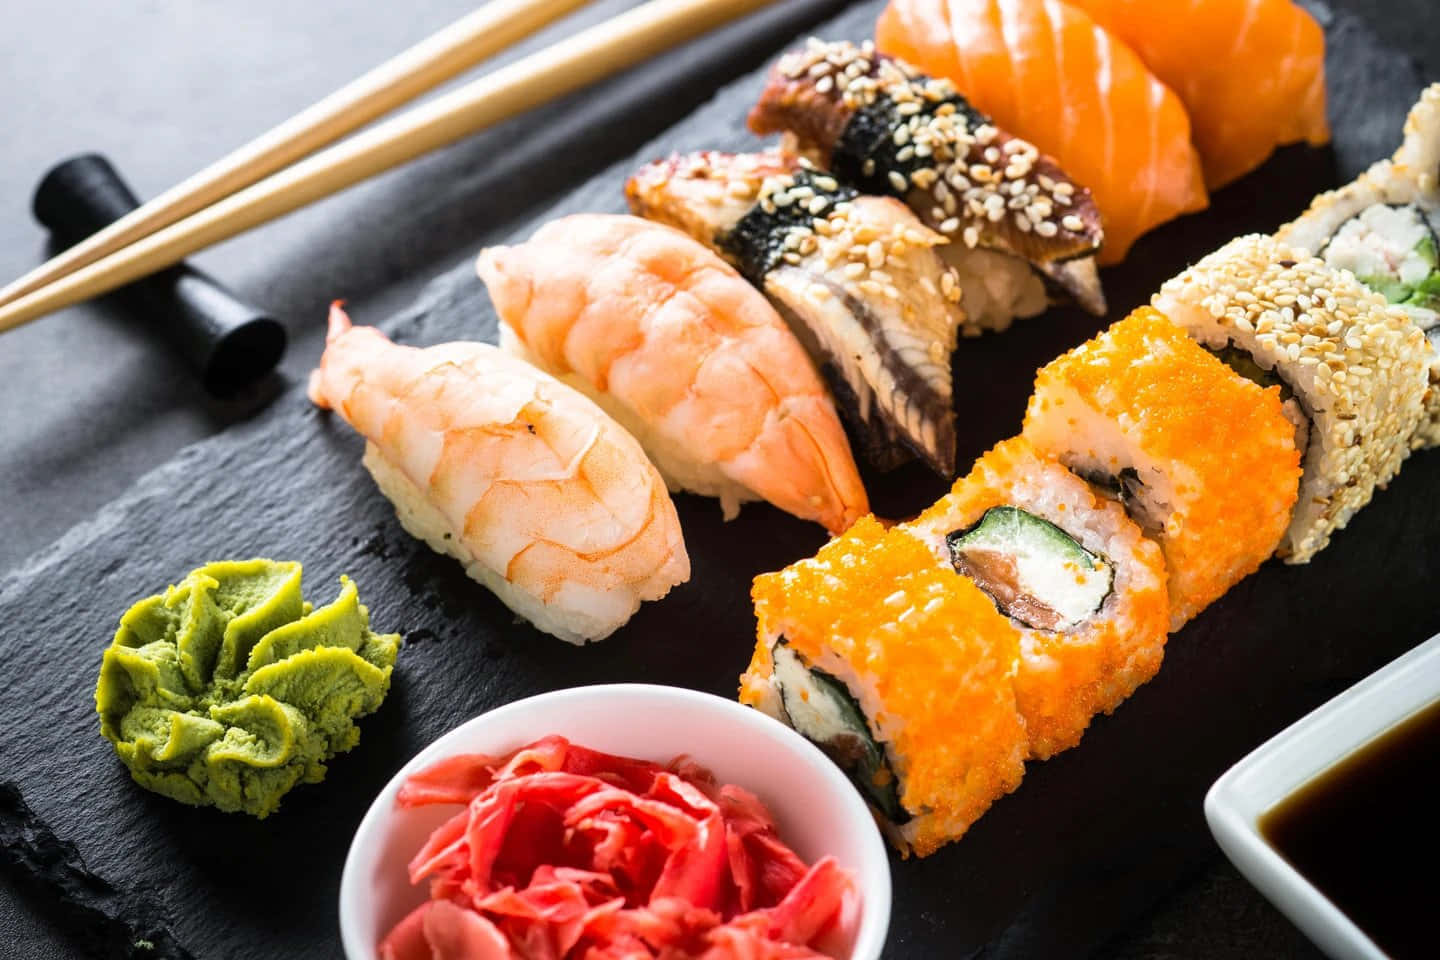 Download Sushi Pictures | Wallpapers.com